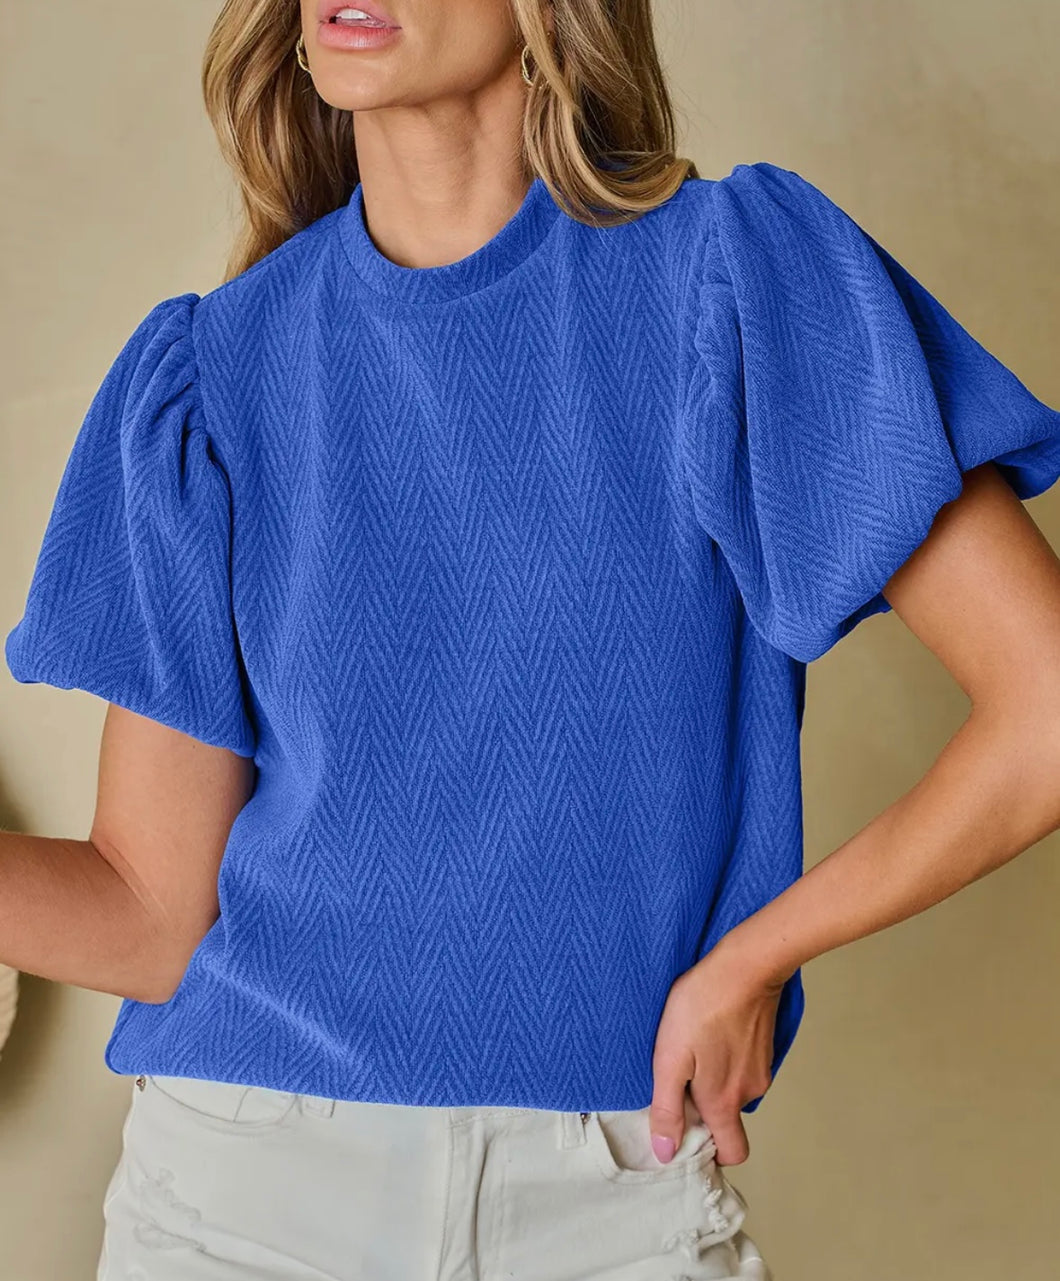 The Sapphire Top